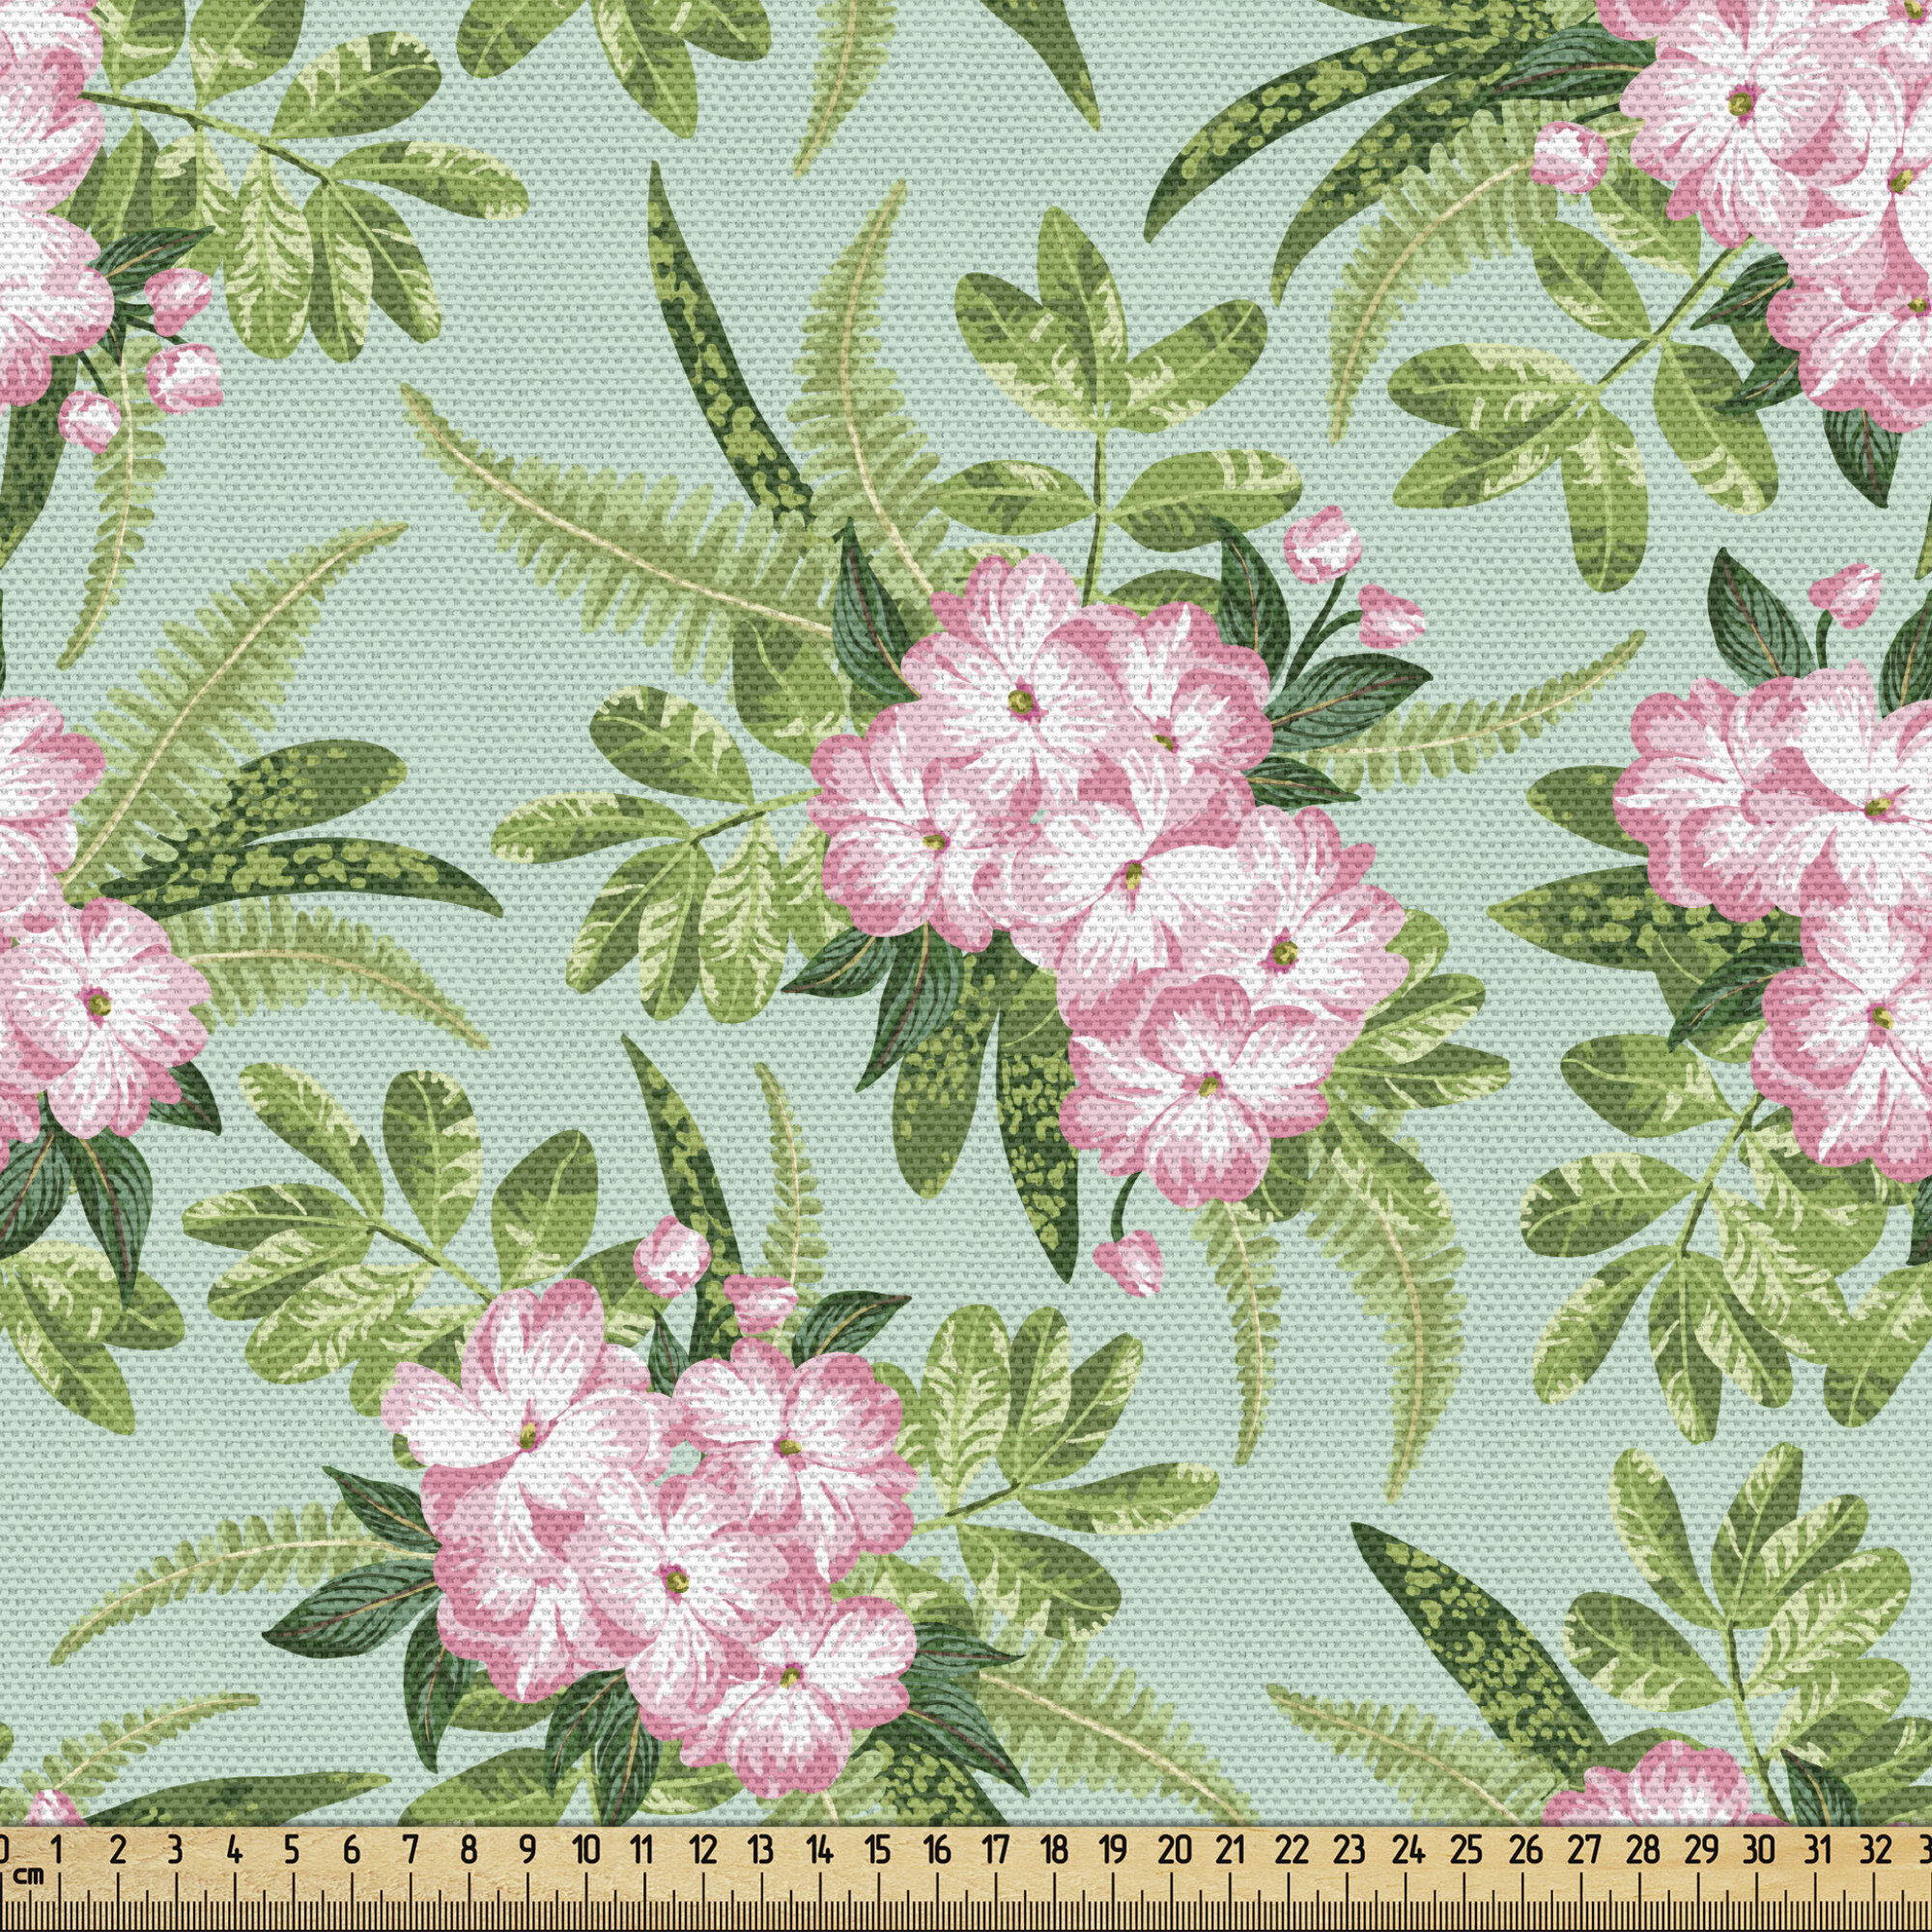 Decorative Fabric for Upholstery and Home Accents Ambesonne Floral Fabric by The Yard 5 Yards Green Lilac Hand Drawn Bold Flowers and Leaves Arrangement